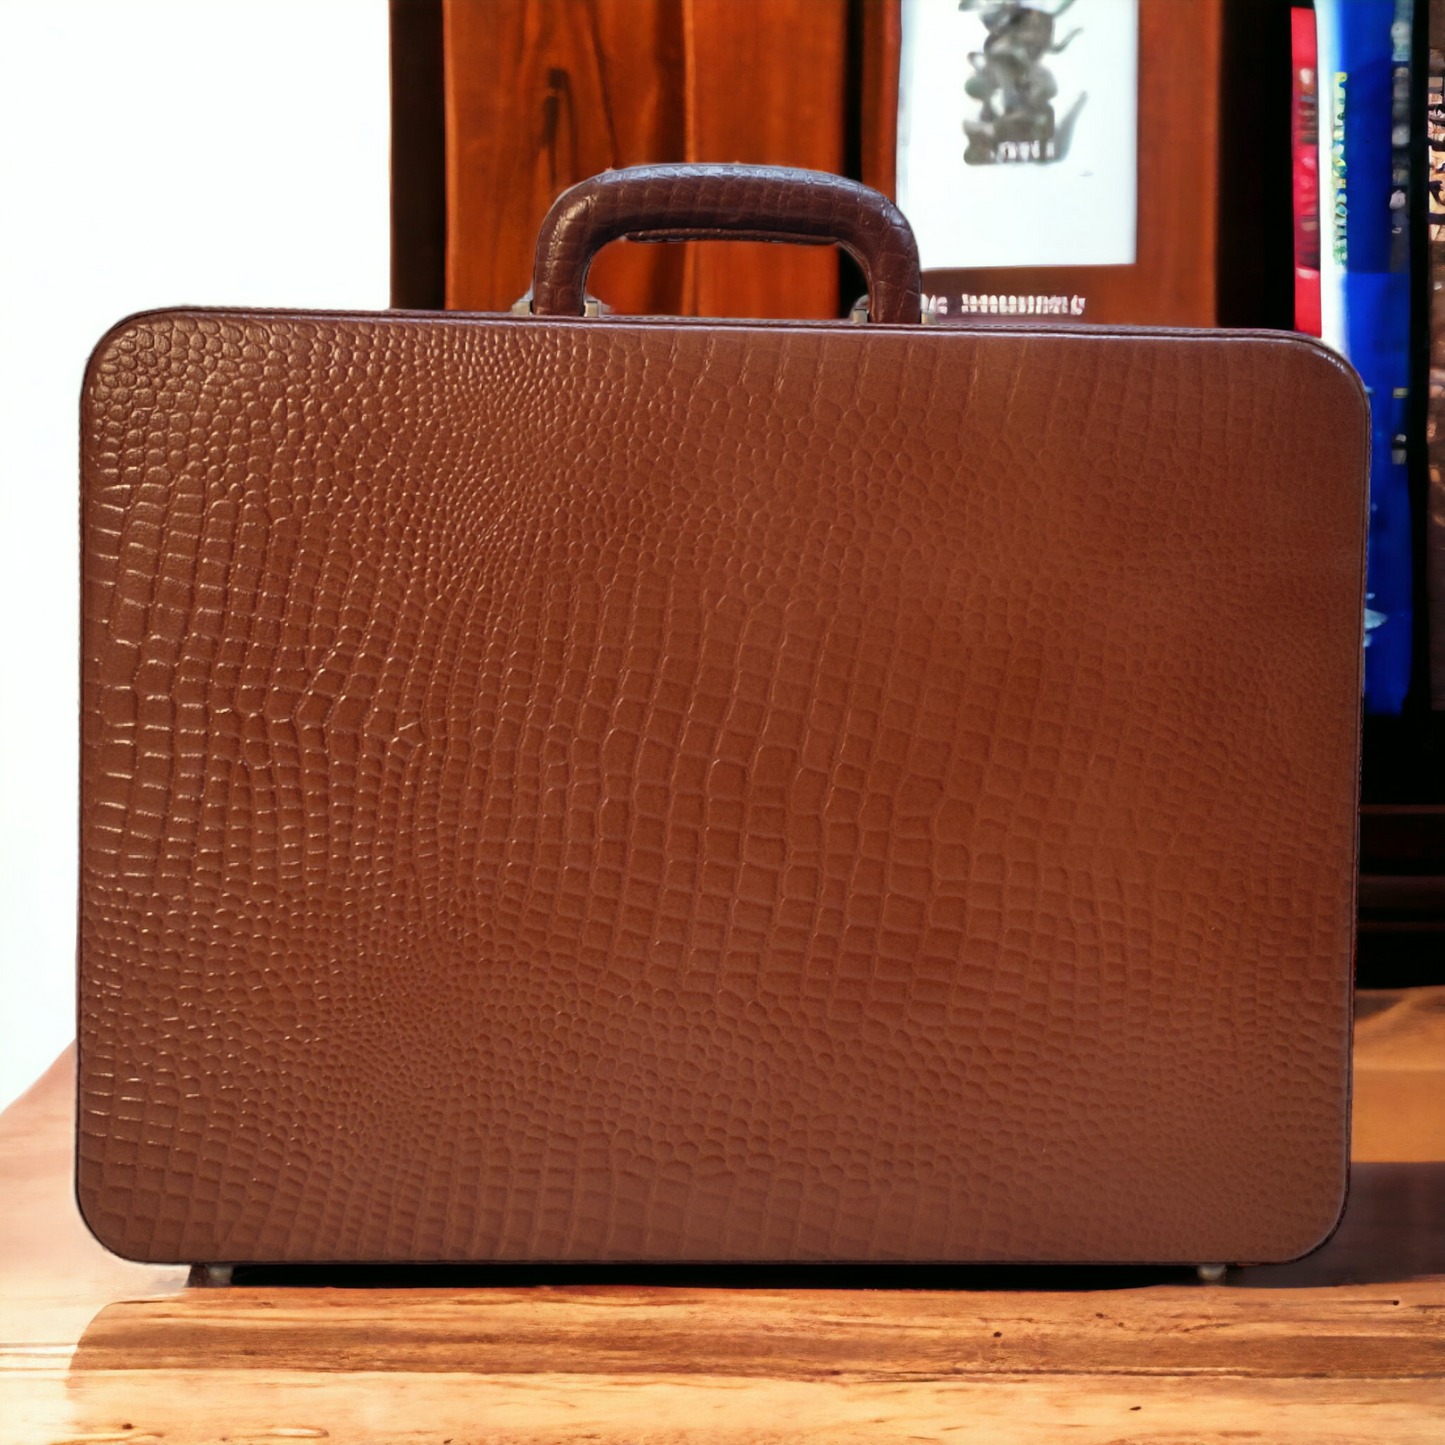 Leather Briefcase for Men Leather Attache Briefcase Corporate Gift Executive Leather Handbag for Men Leather Suitcase